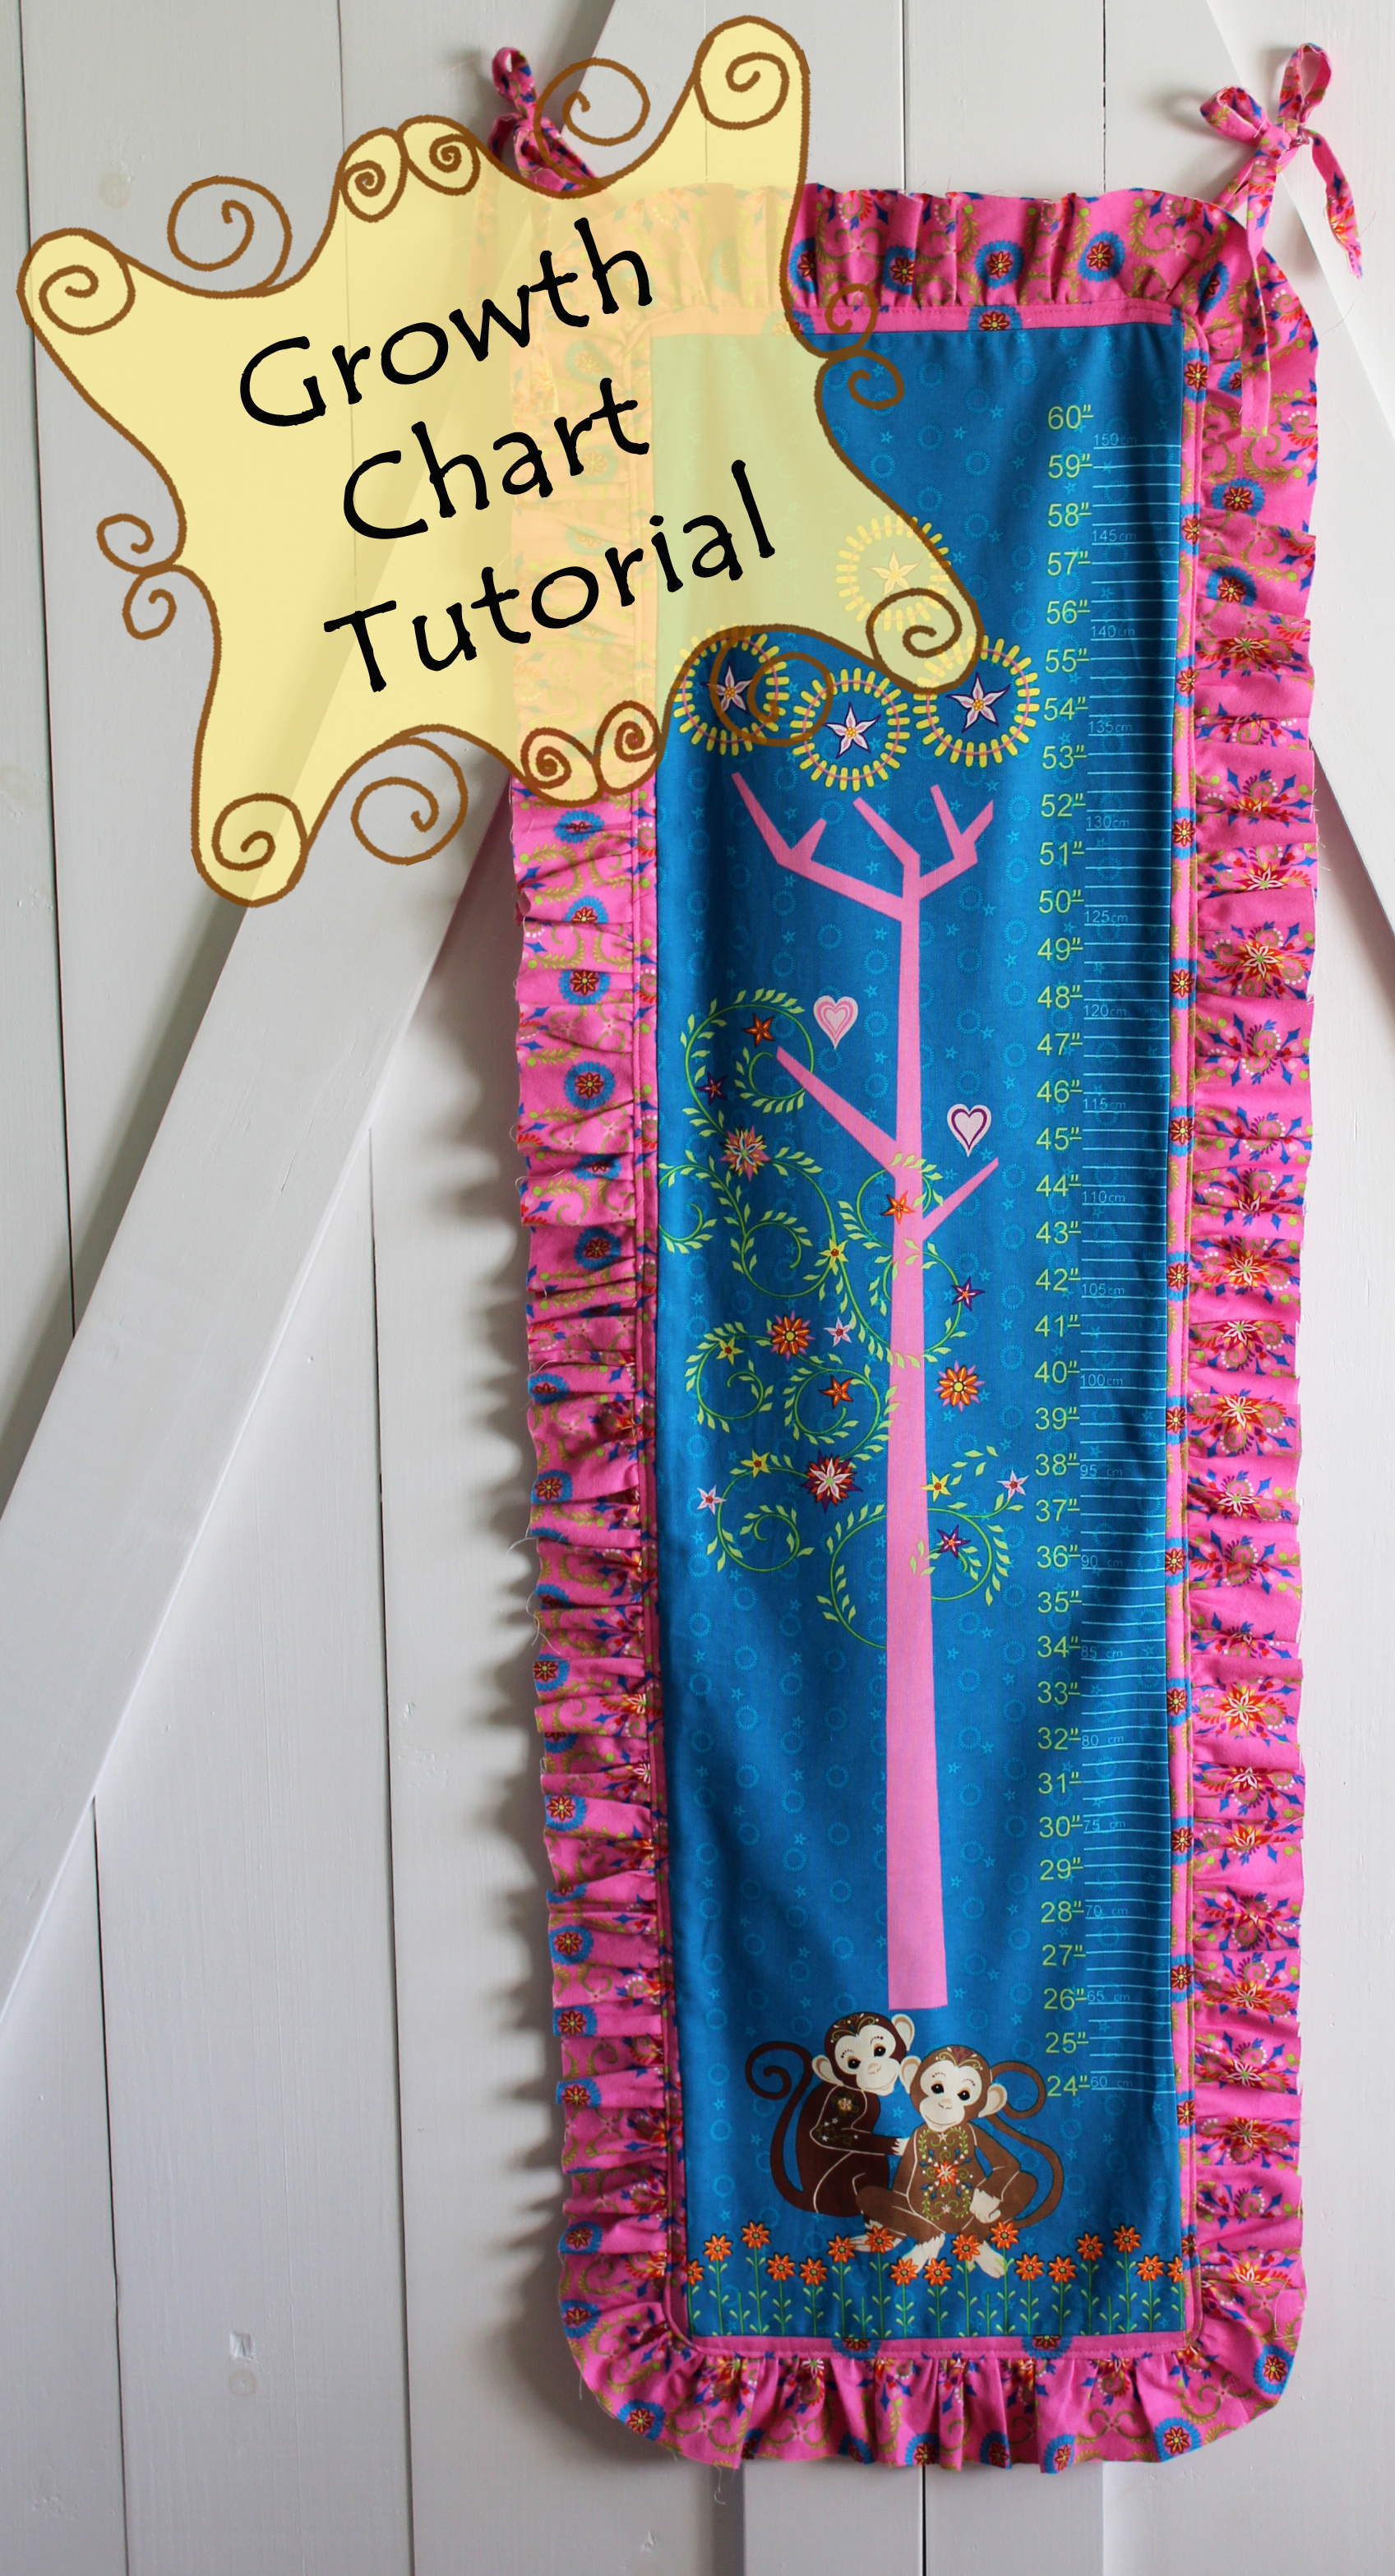 Fabric Growth Chart Tutorial {and 2 giveaways!}